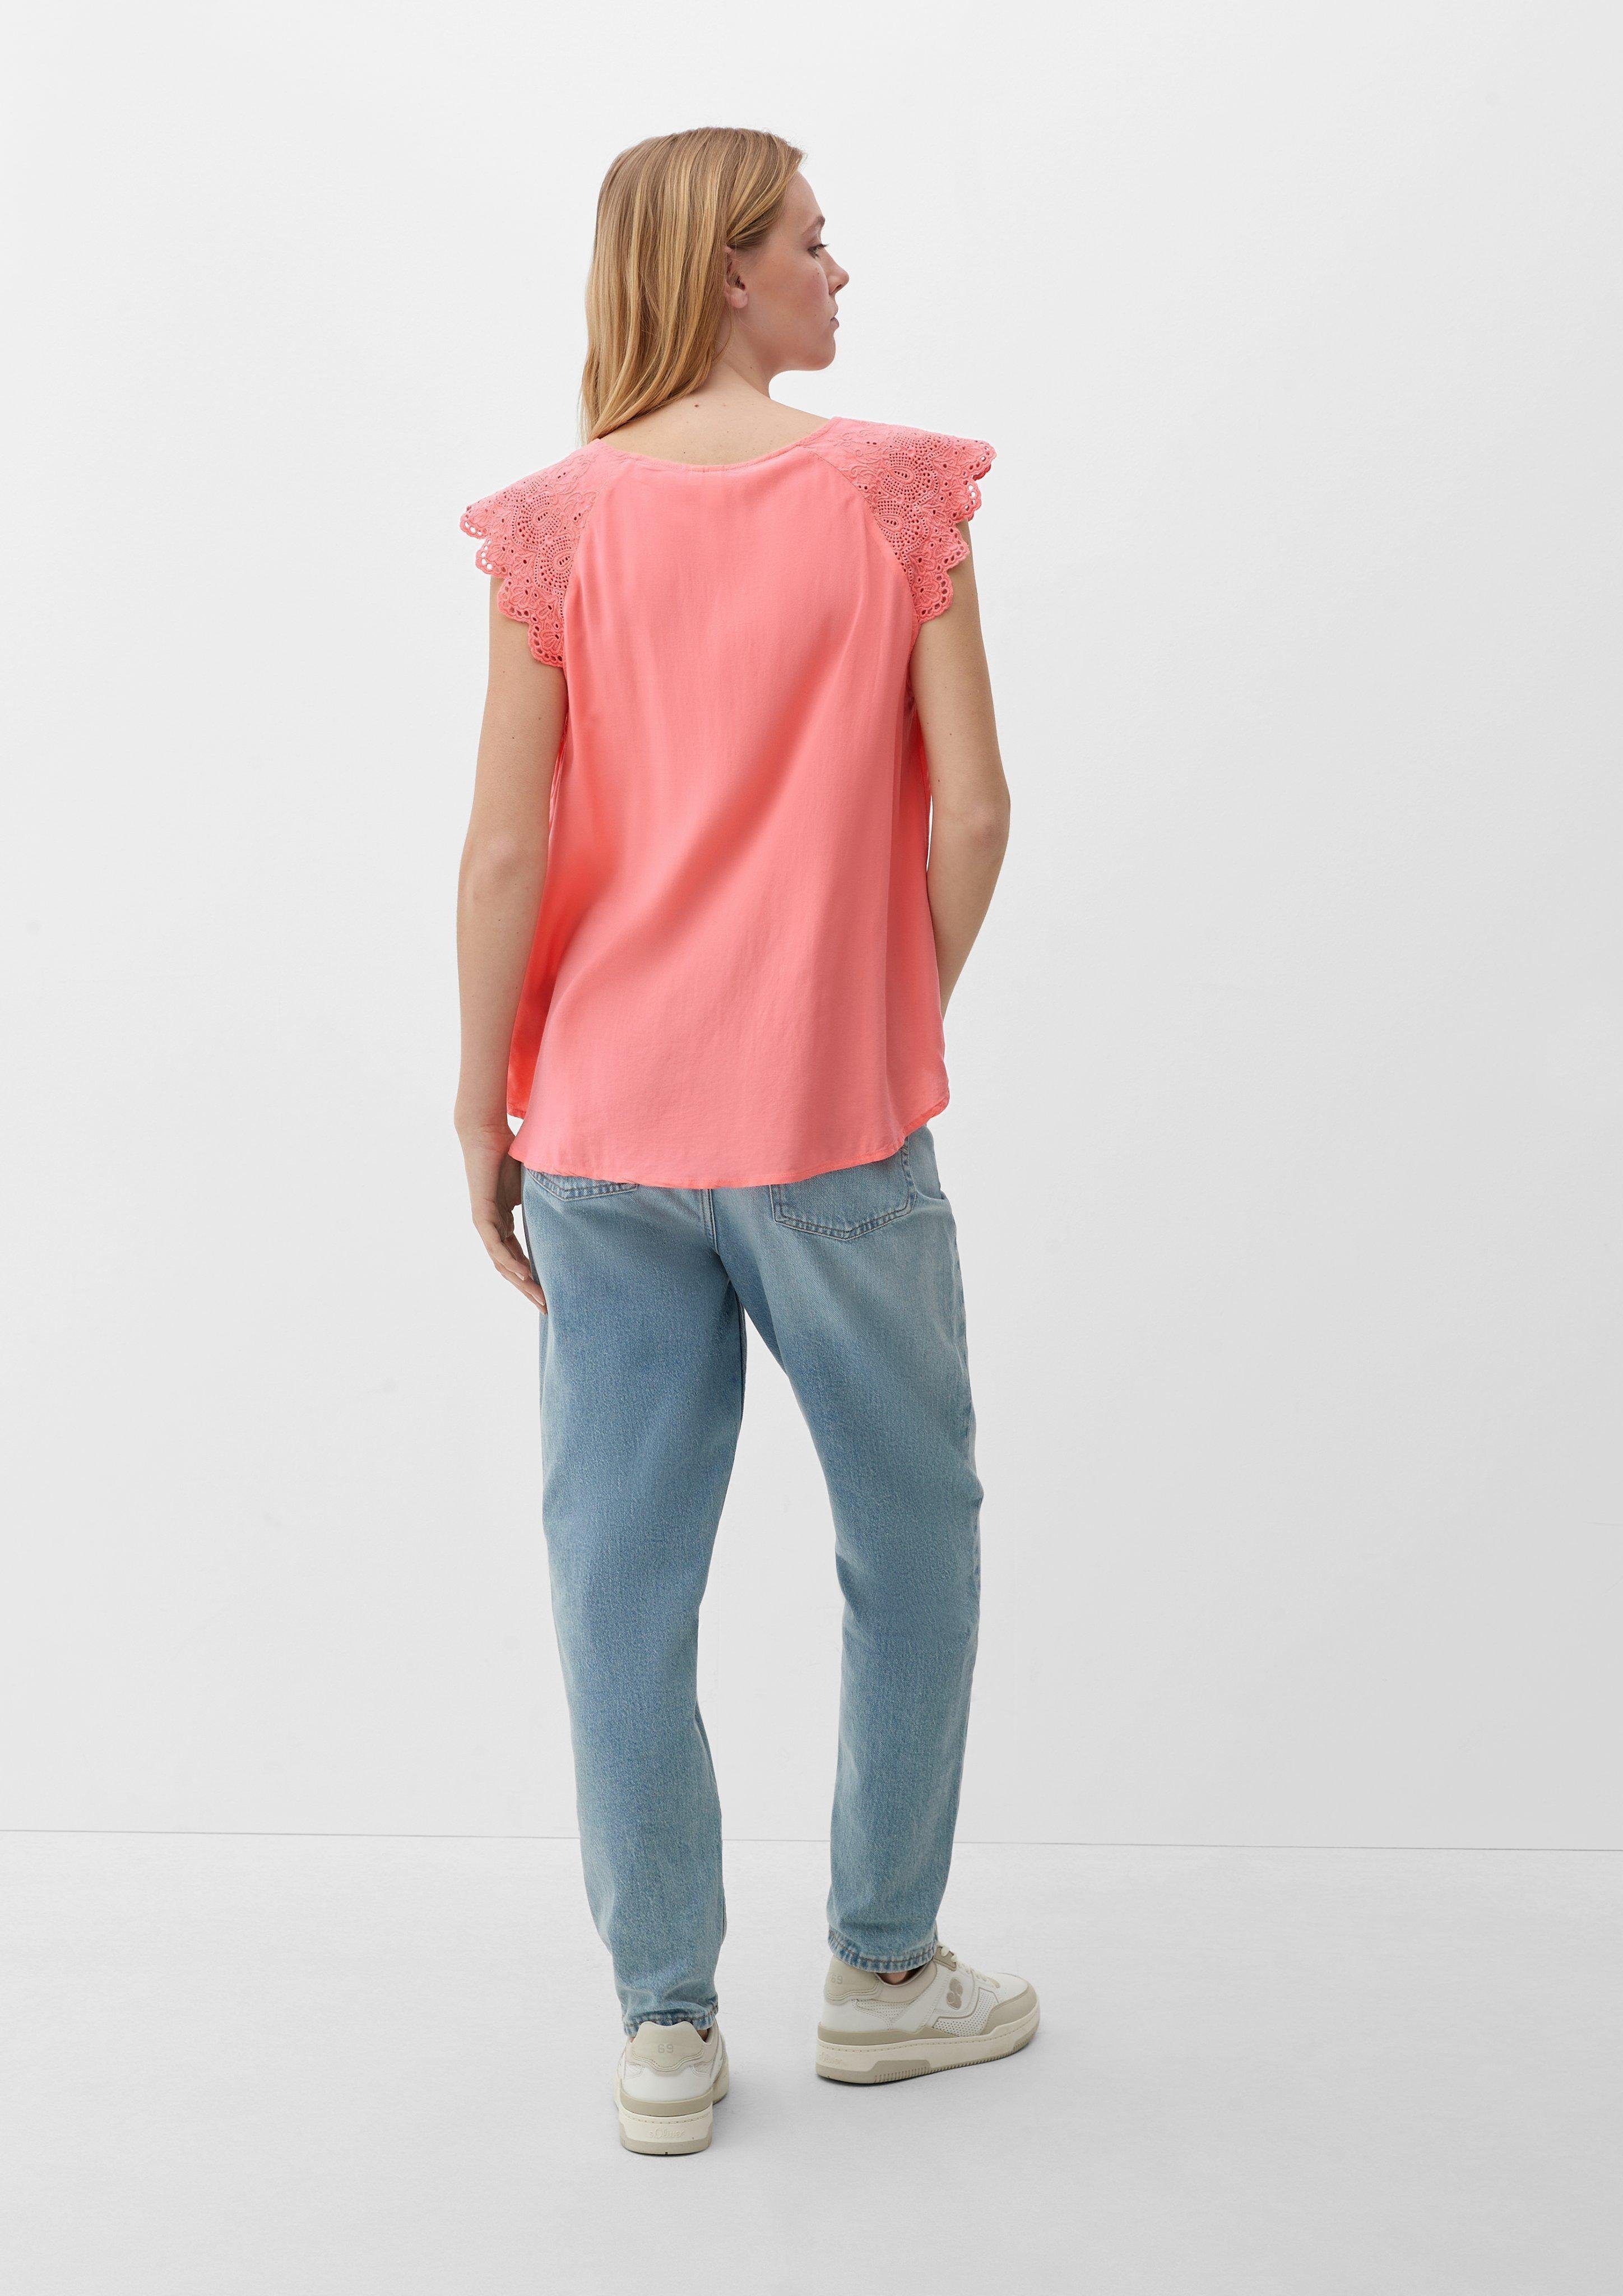 Anglaise koralle Bluse Blusentop mit Broderie QS